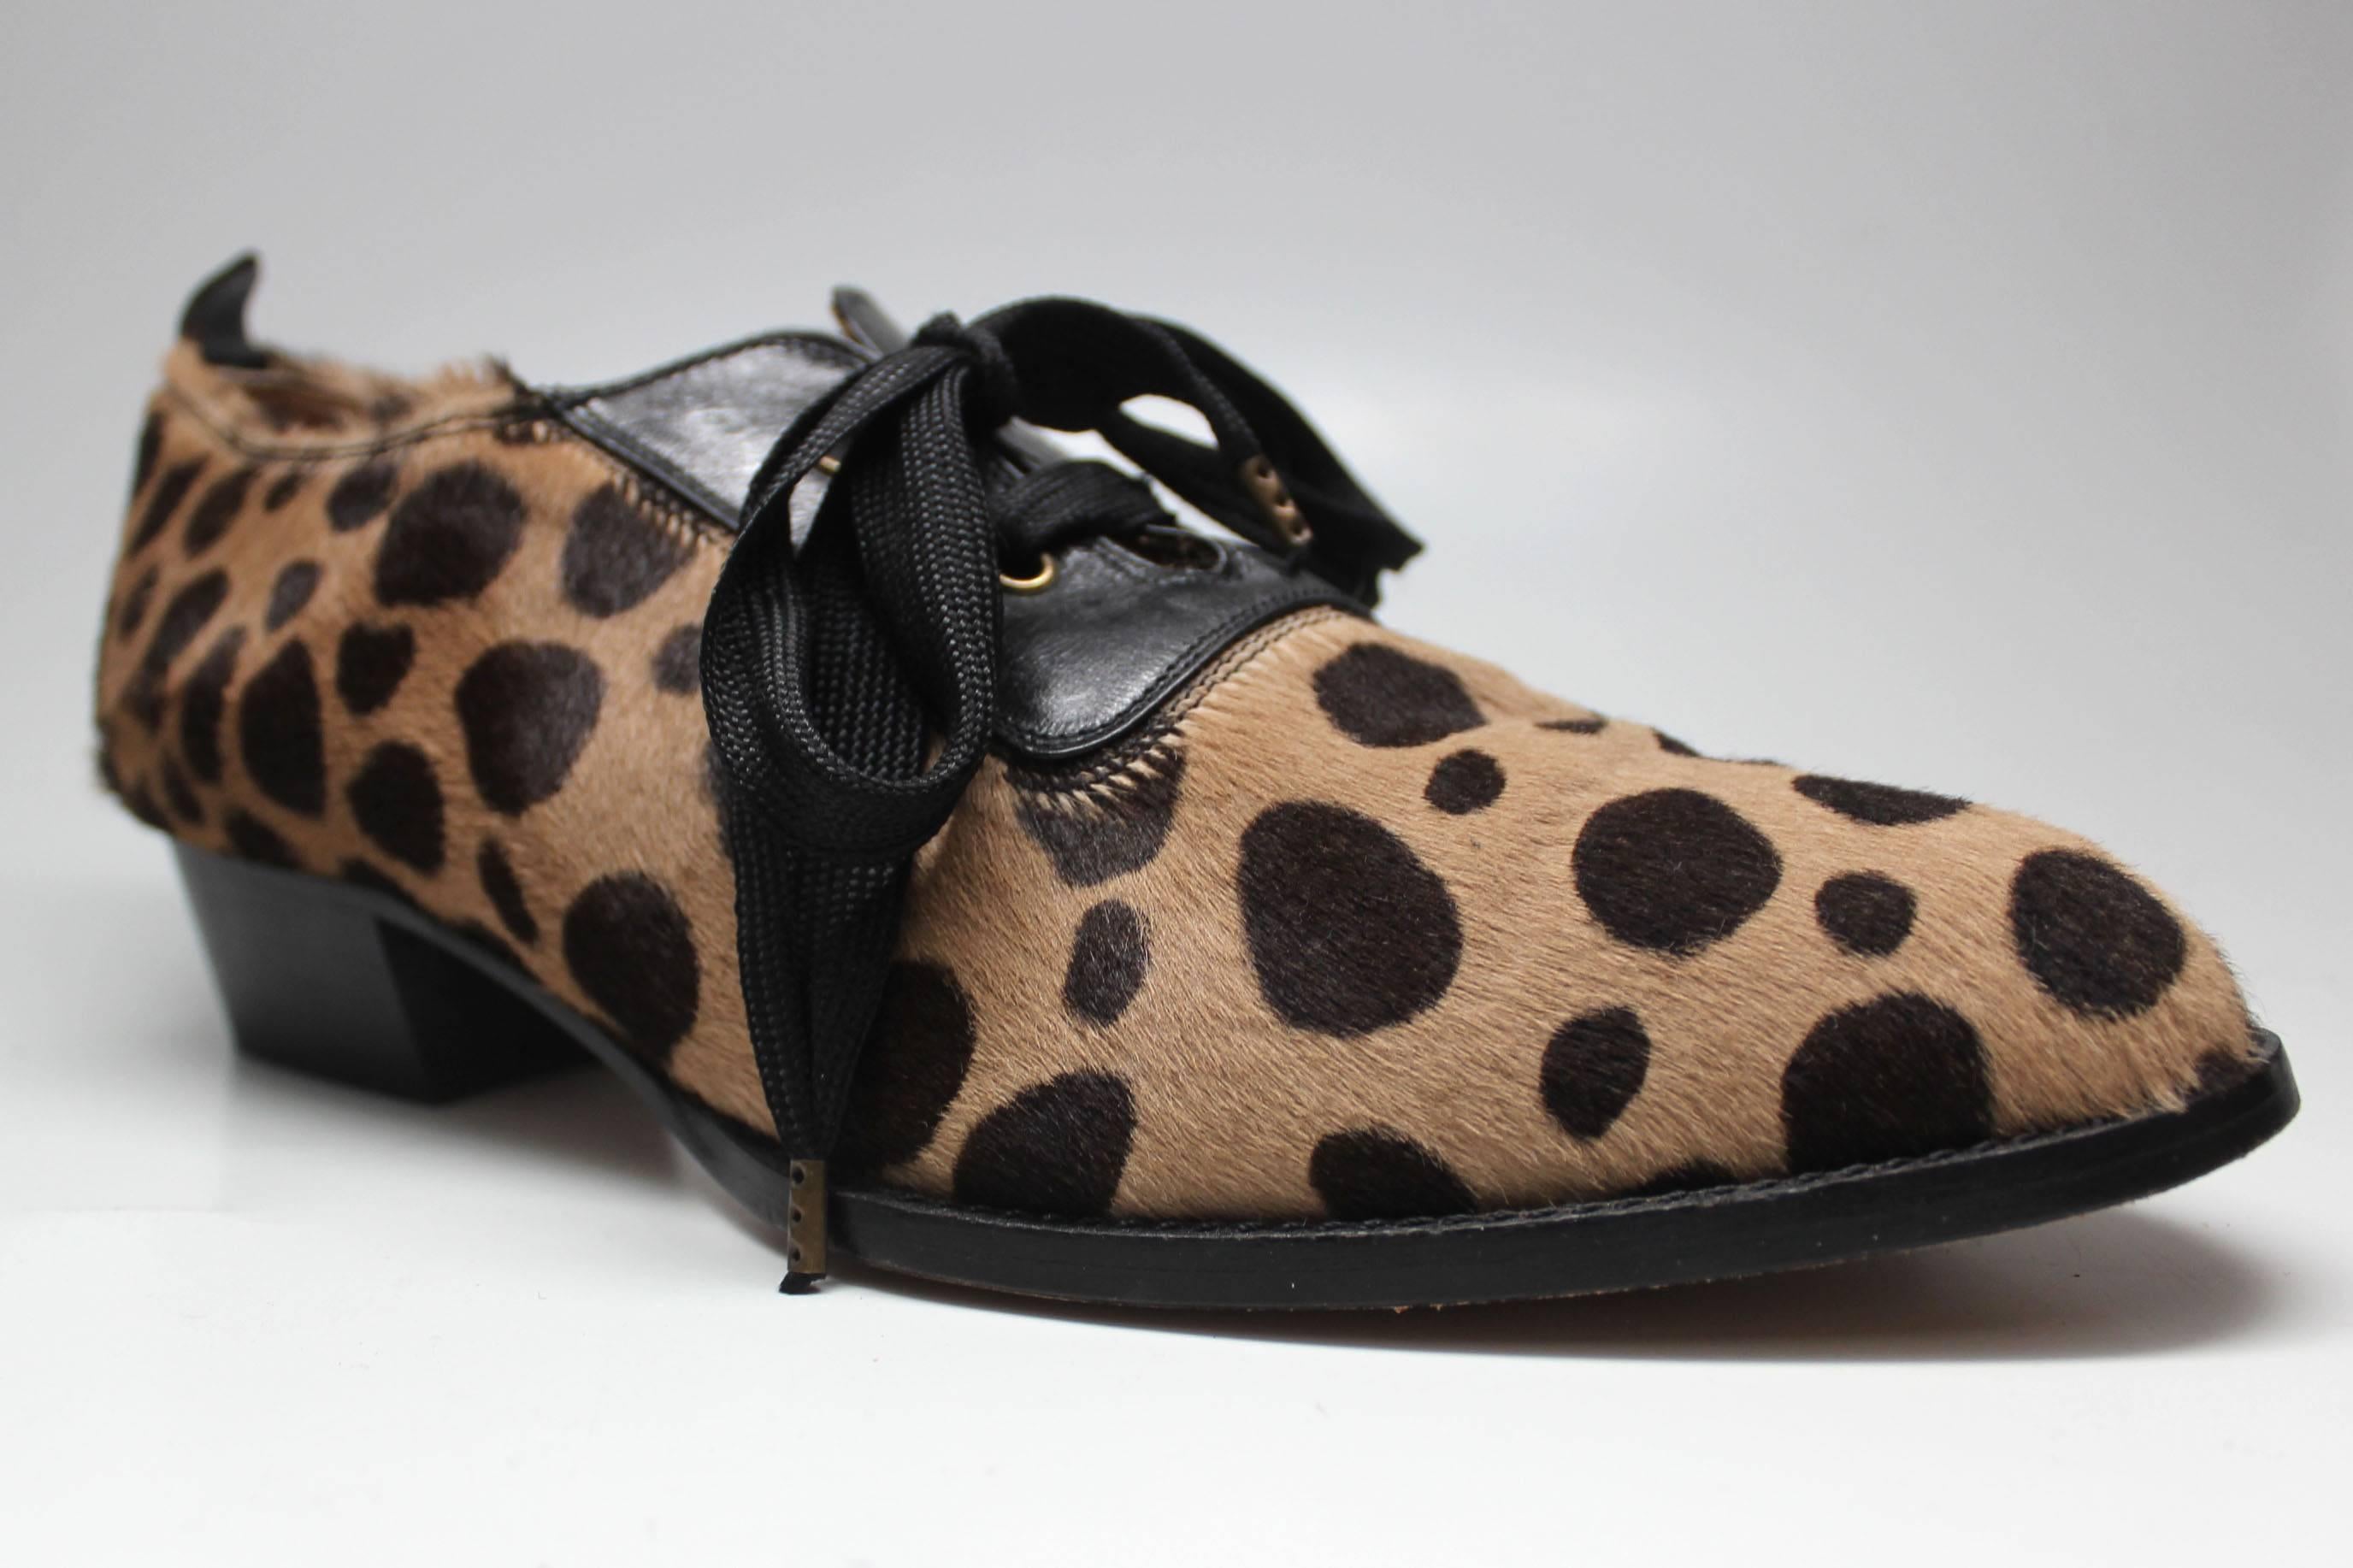 These luxe ponyskin oxfords are printed with leopard like spots. They are trimmed in black leather and have grosgrain laces.  They were made in Italy by the brand Mare in the 1990s.